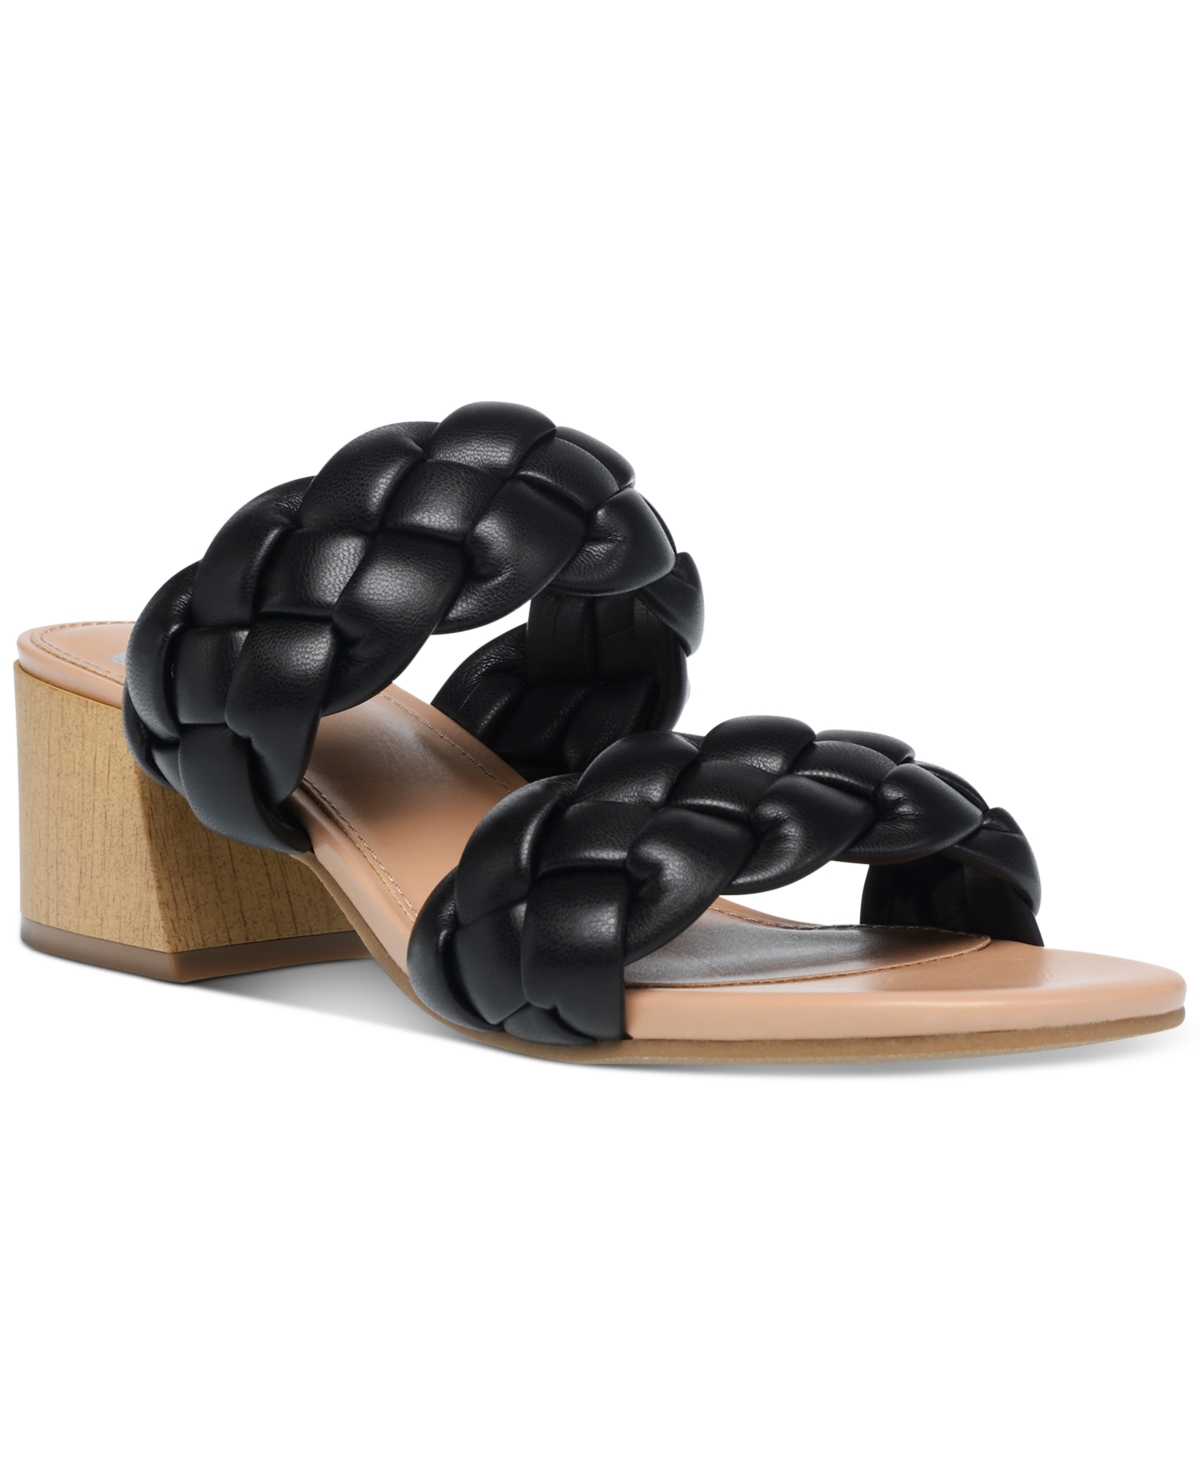 Dv Dolce Vita Stacey Plush Braided Sandals Women's Shoes